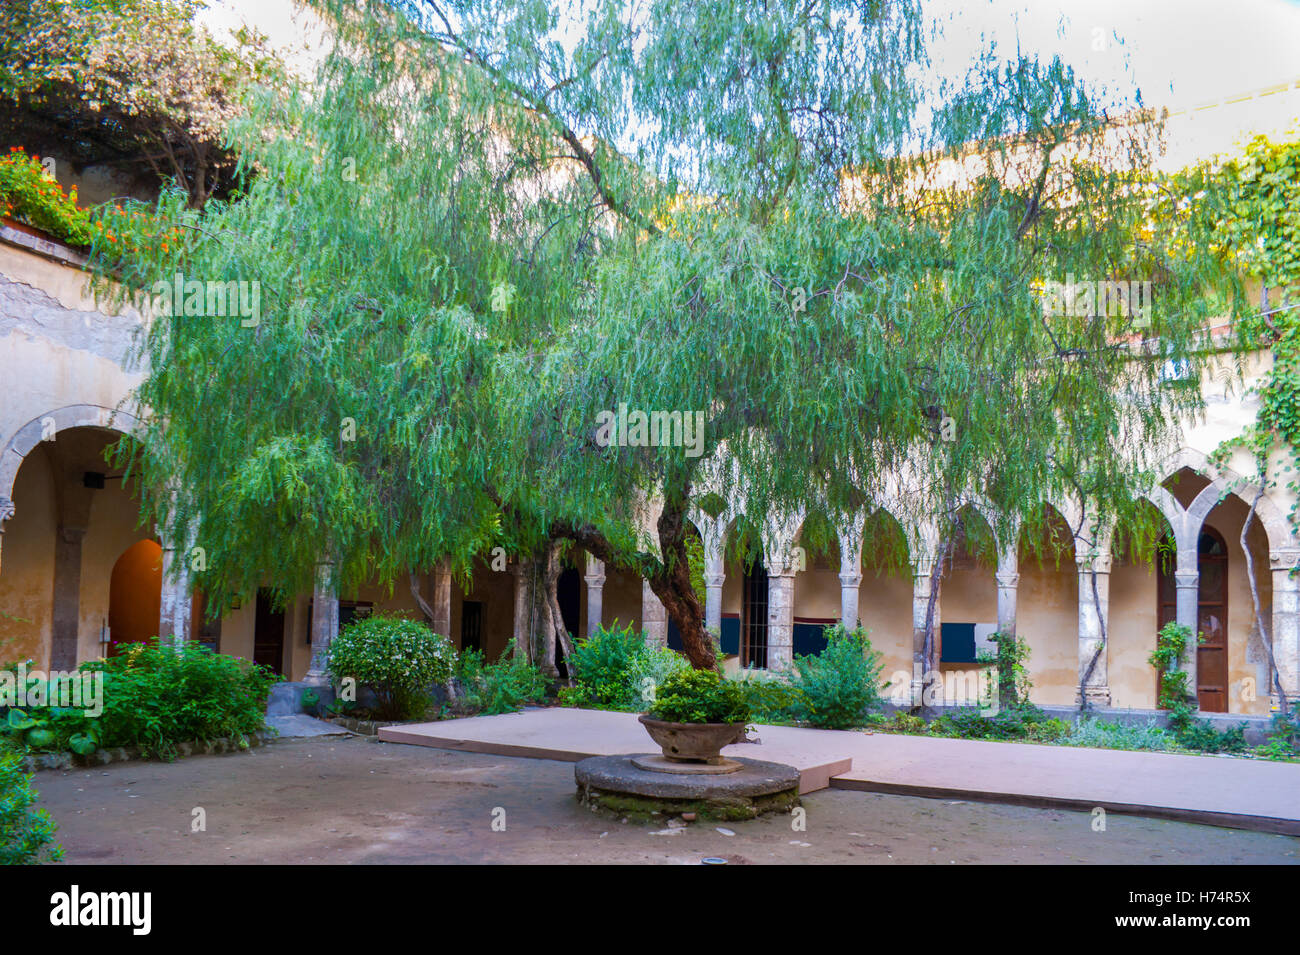 the big green tree grows in the courtyard of the church Stock Photo